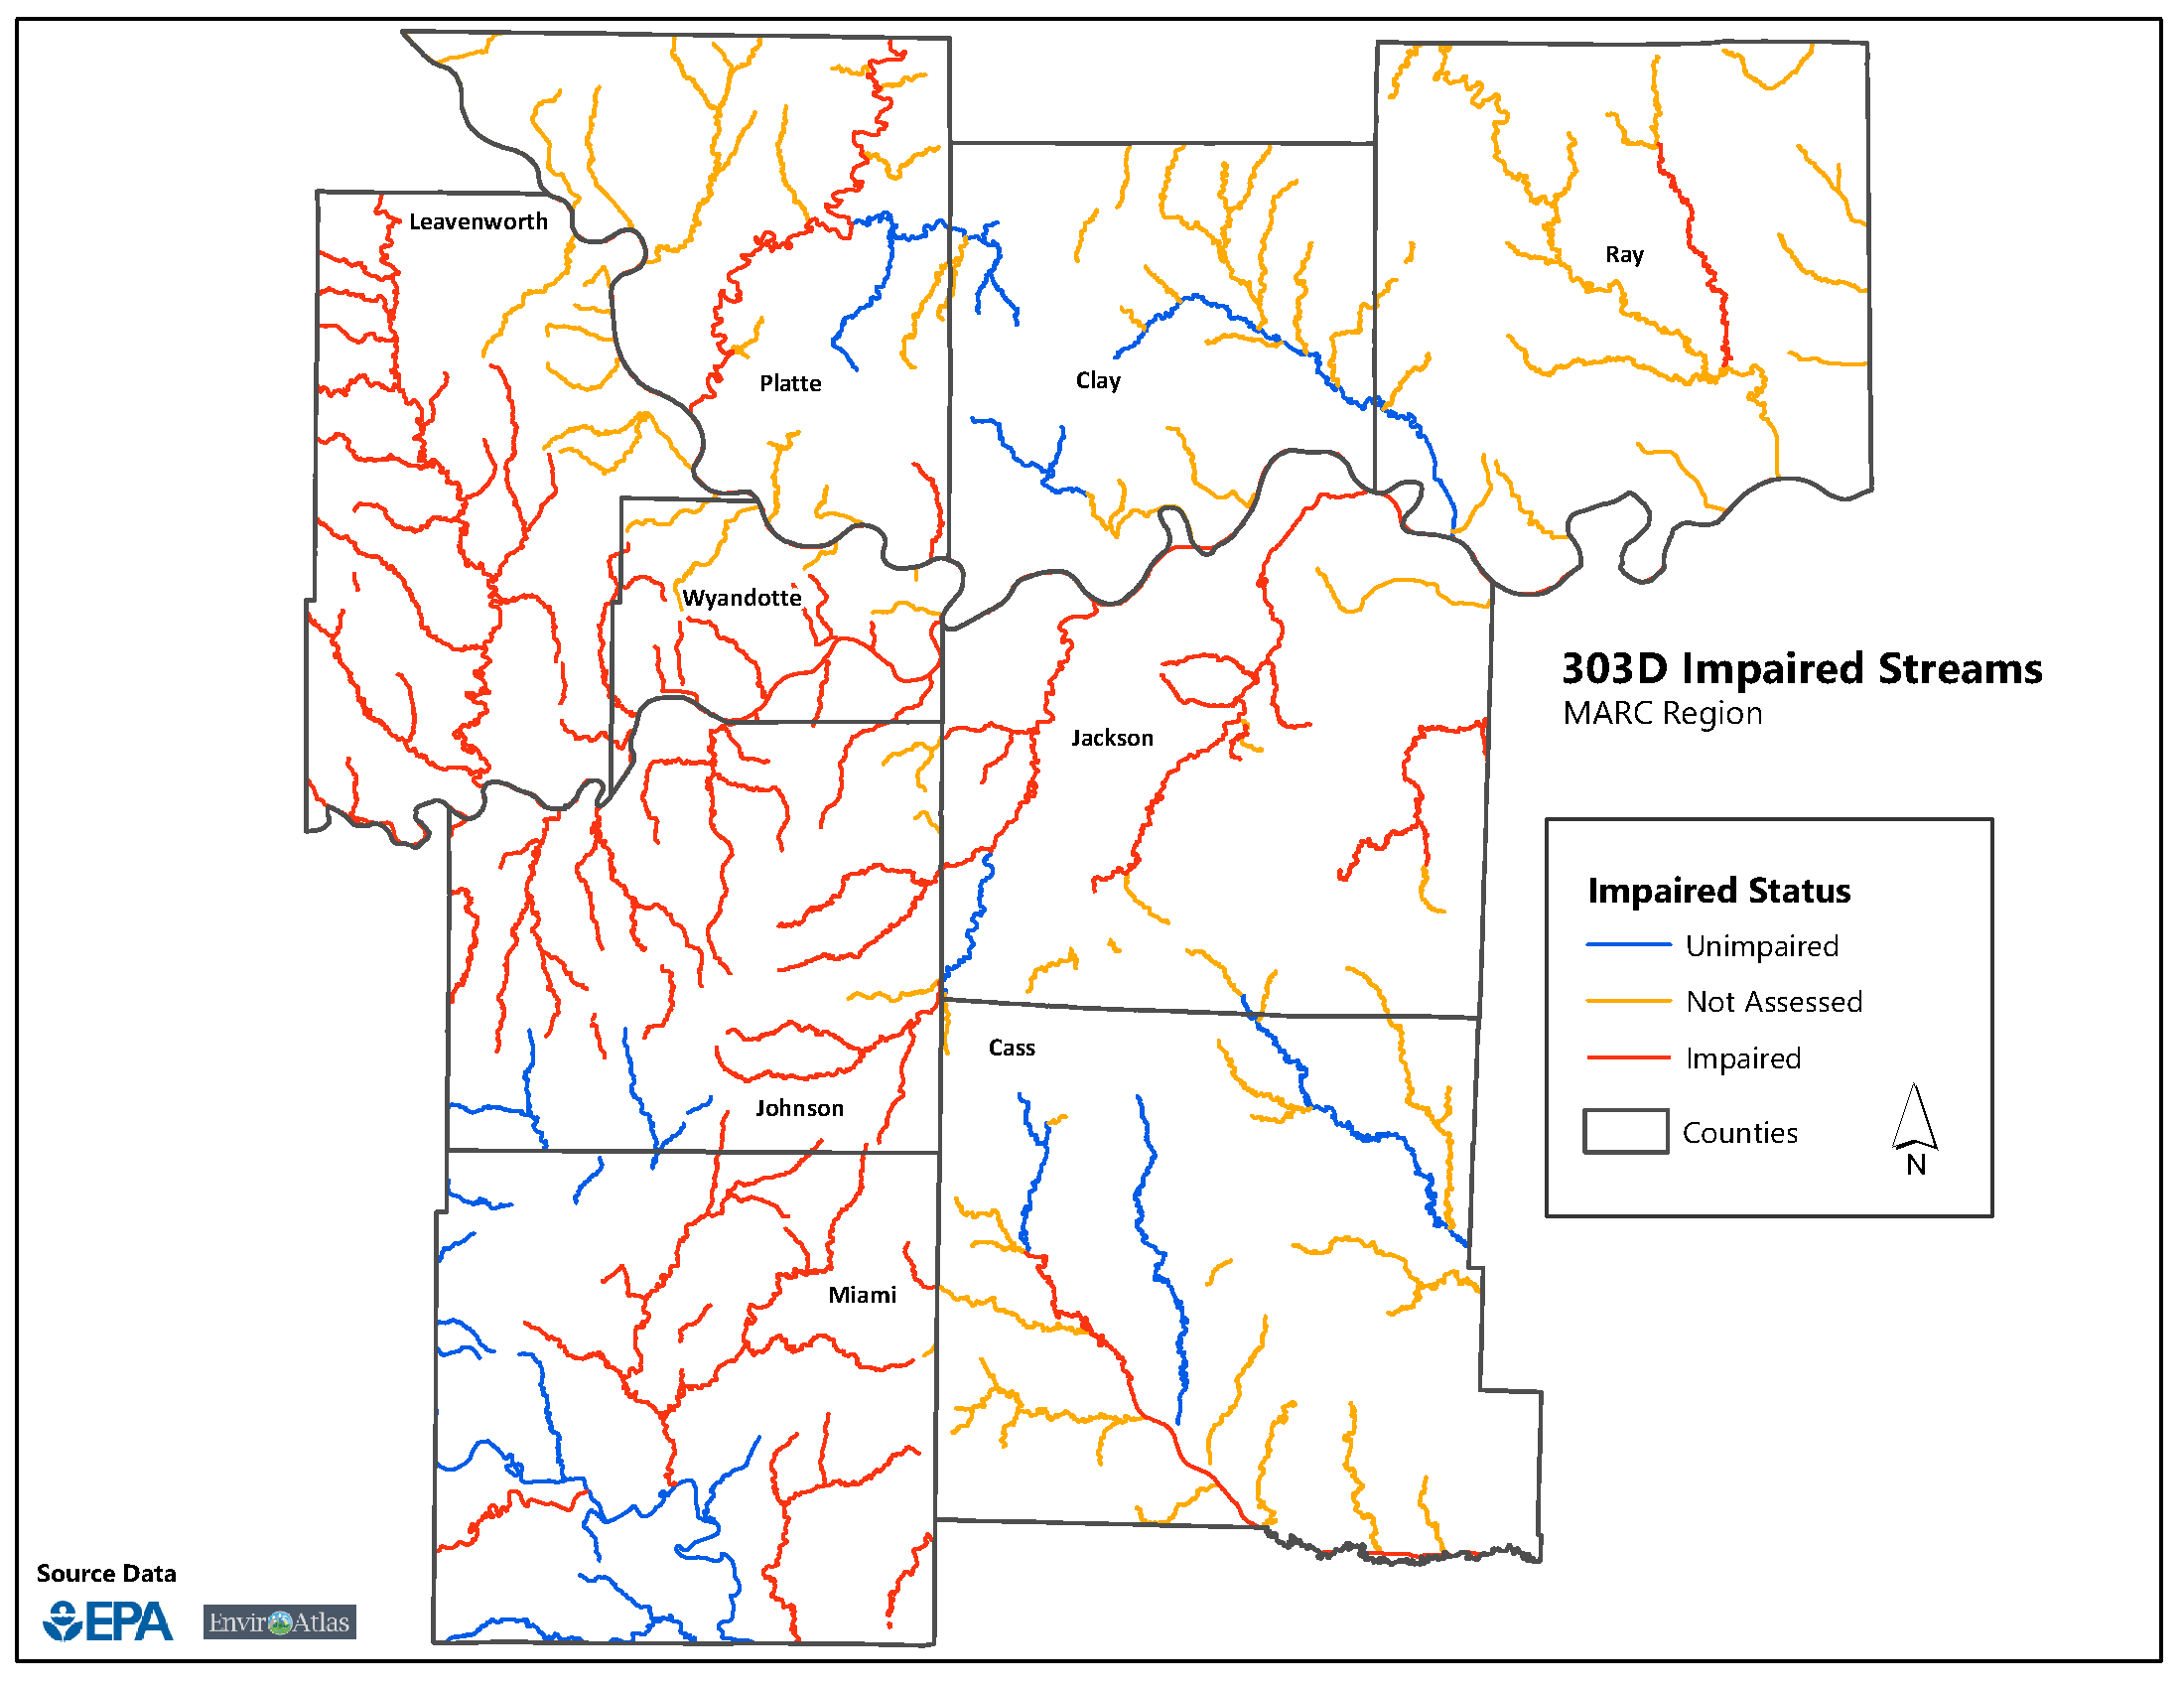 Map of the 303D Impaired Streams in the MARC Region